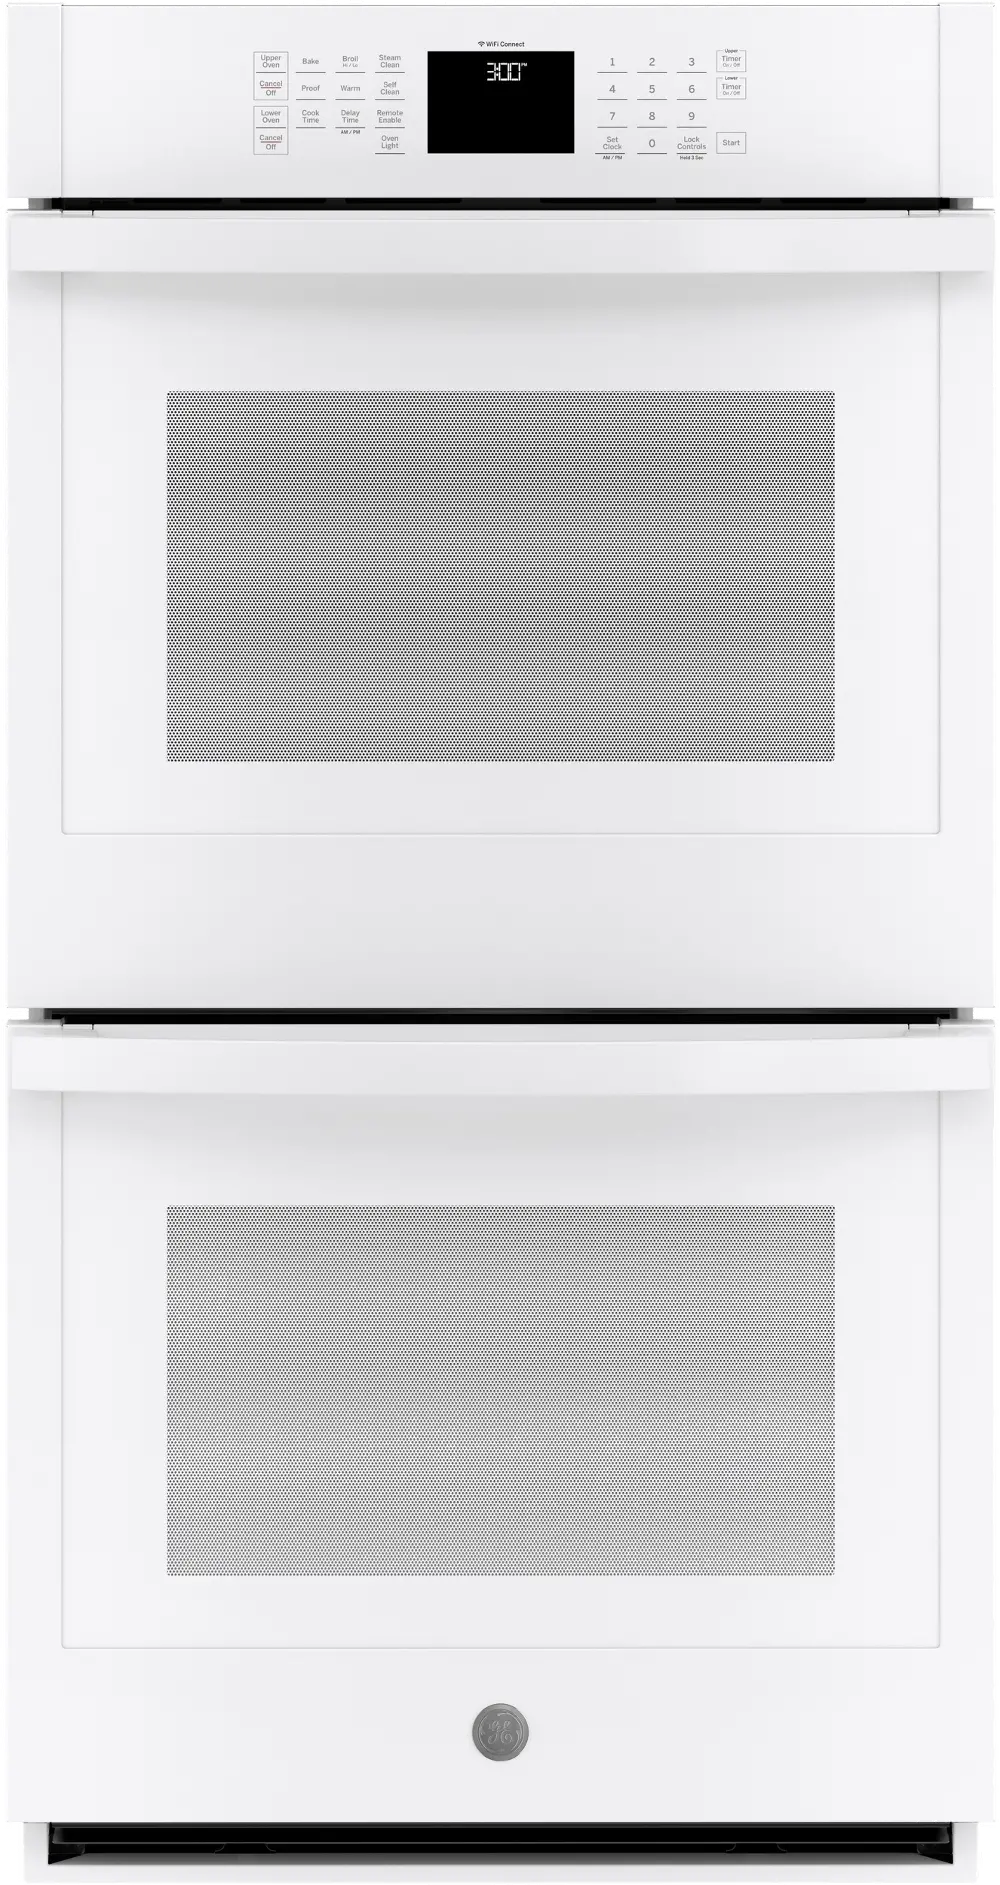 JKD3000DNWW GE 27 Inch Double Wall Smart Oven - 8.6 cu. ft. White-1